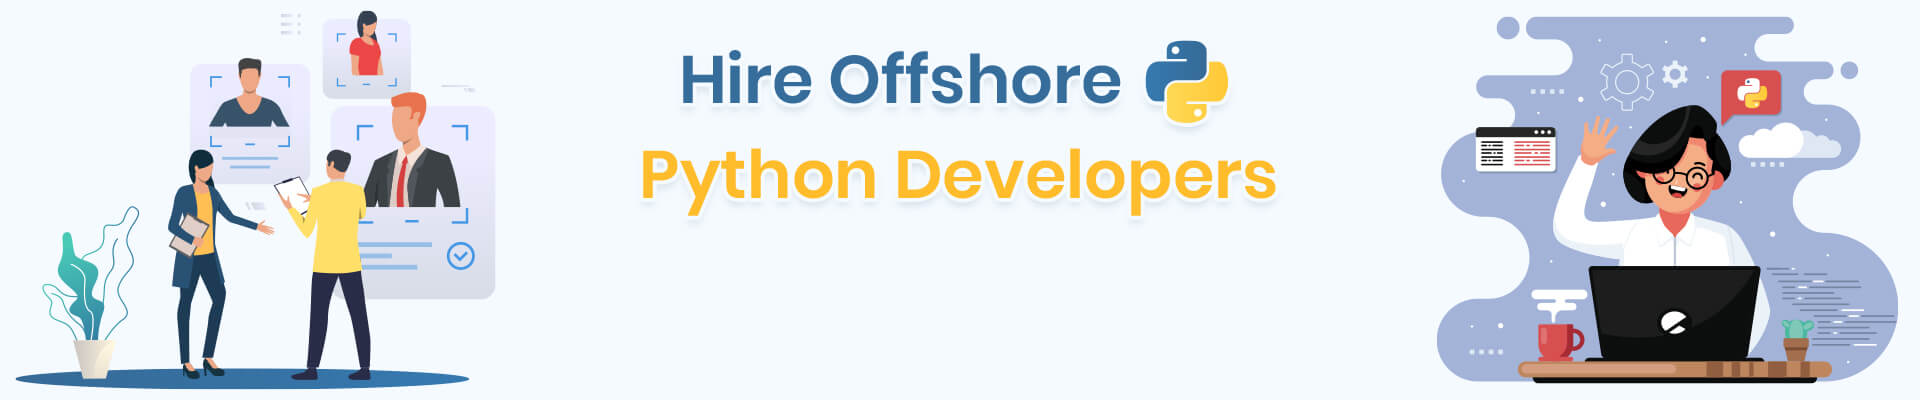 How To Hire Offshore Python Django Developers in India, USA, UK, Dubai, and Canada? [2021]